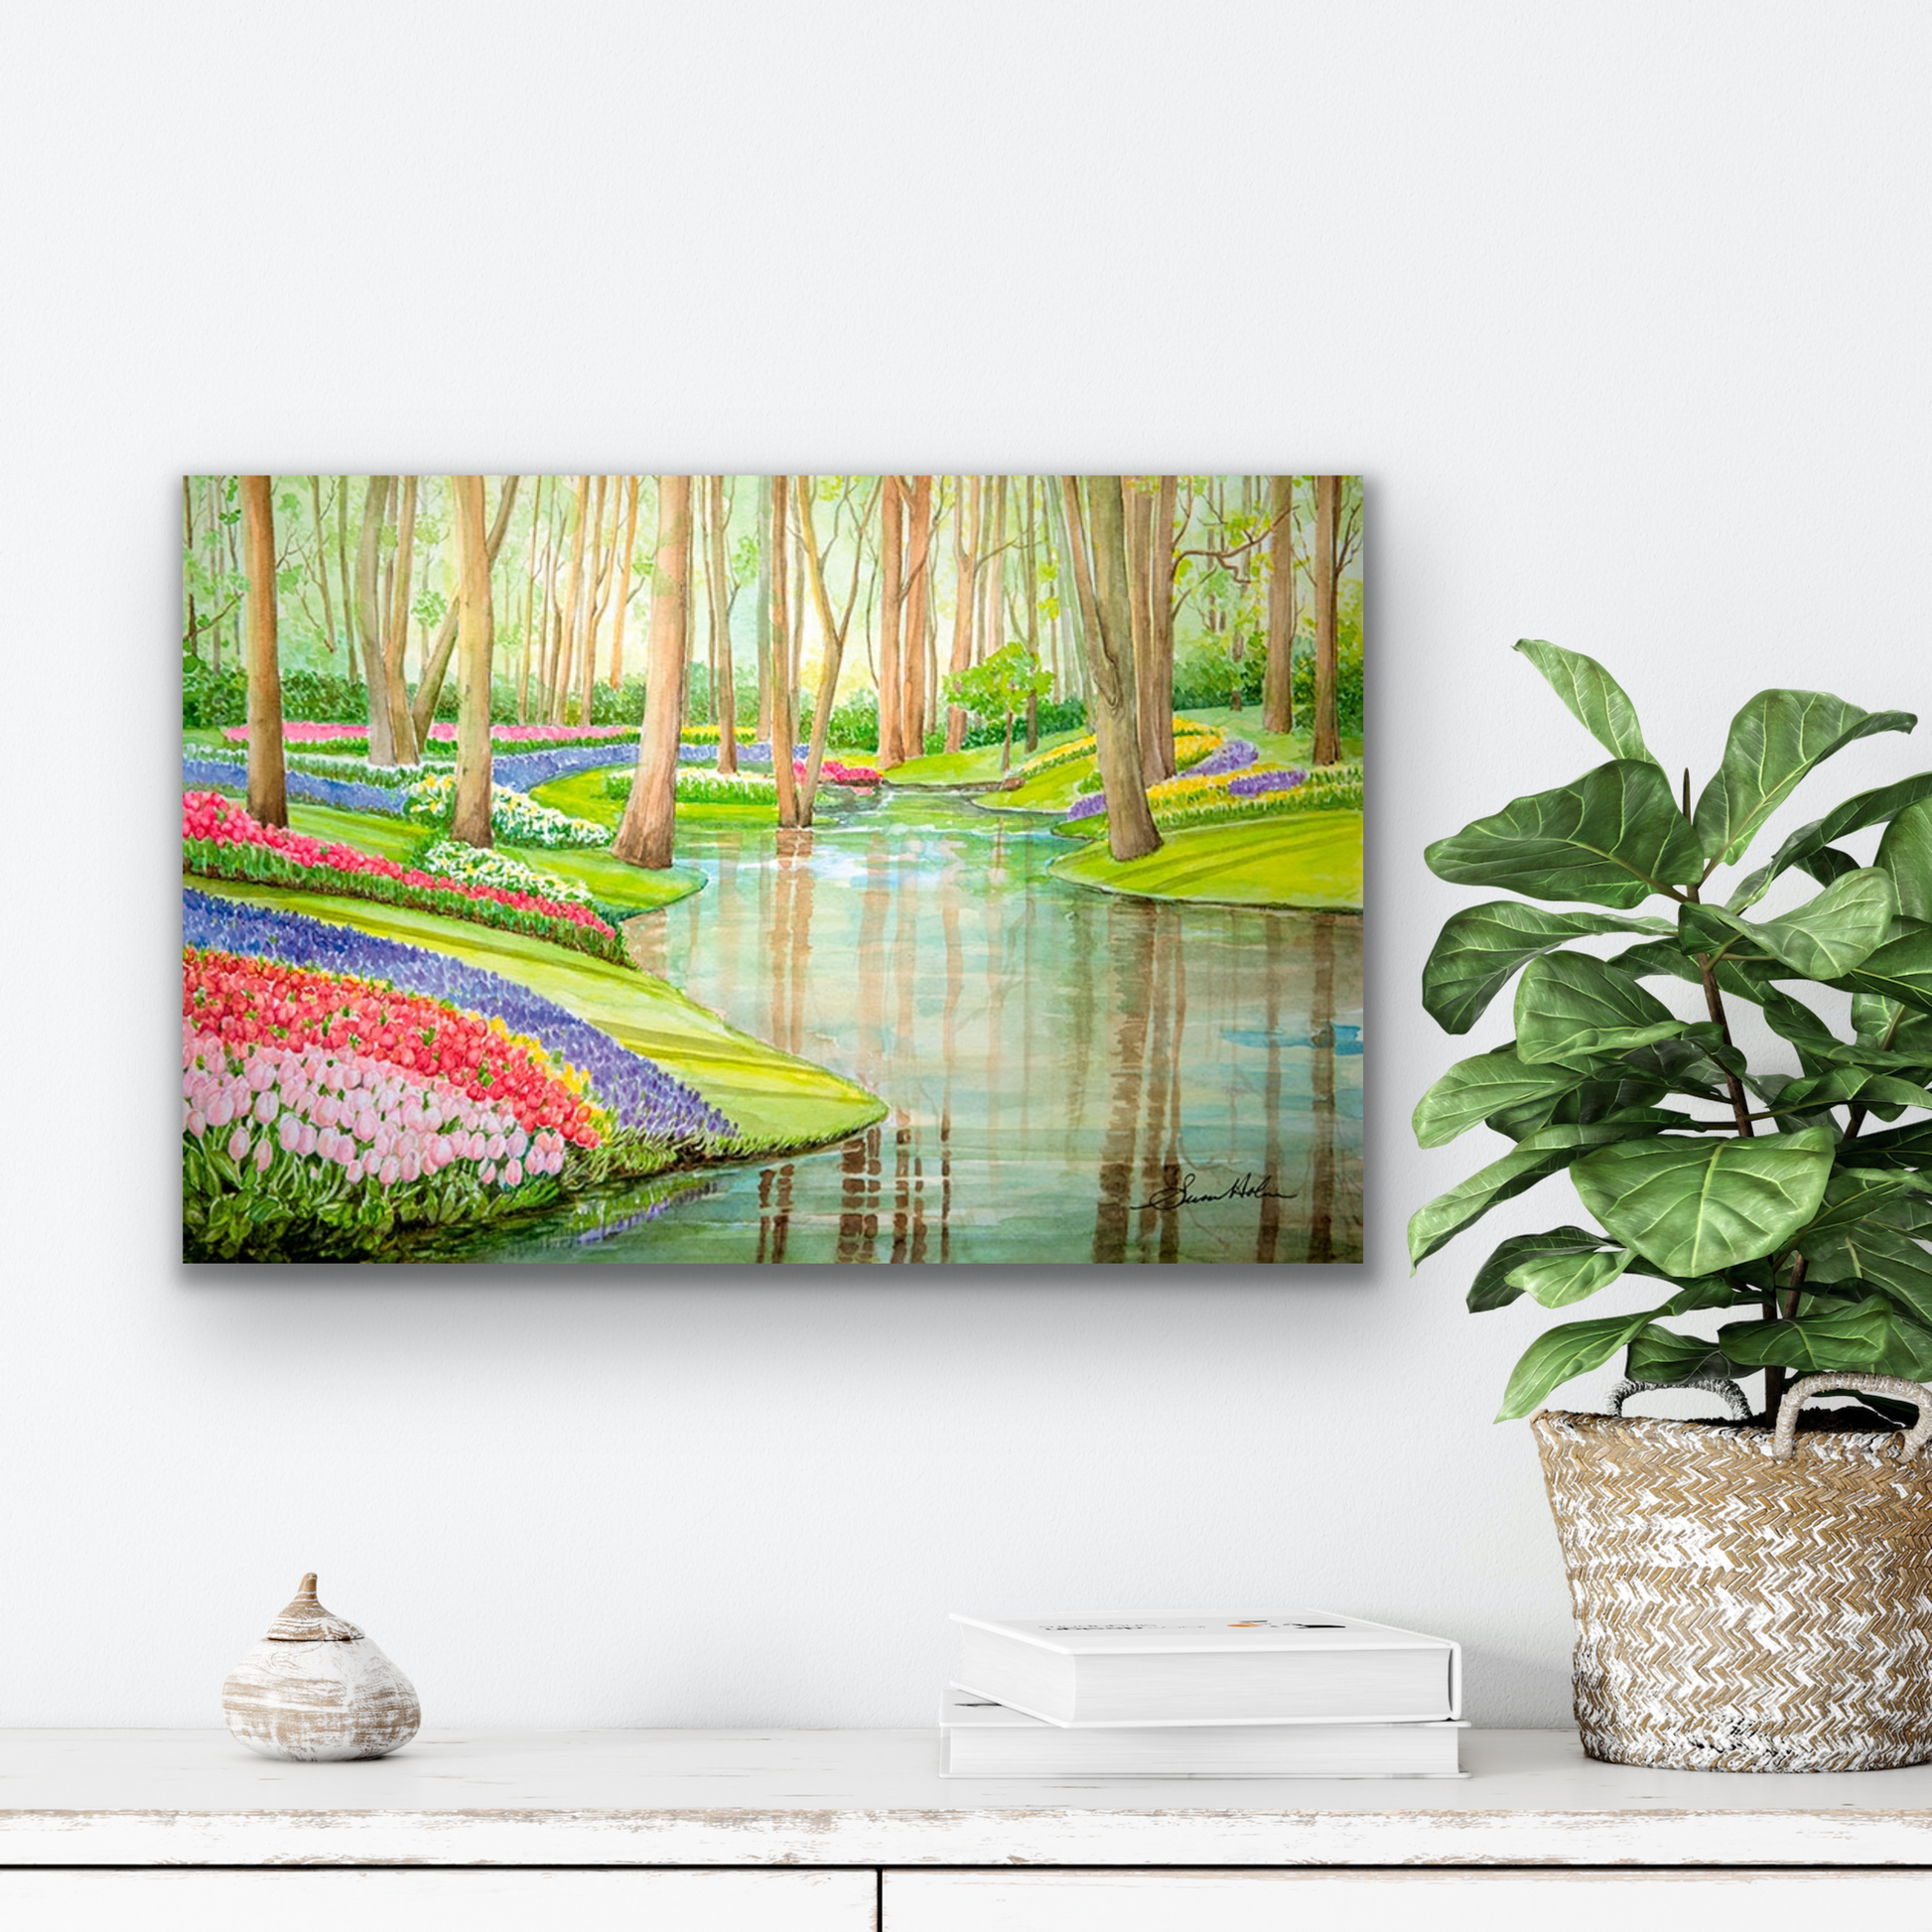 "Spring in Keukenhof" original watercolour will look great in many rooms of your home.